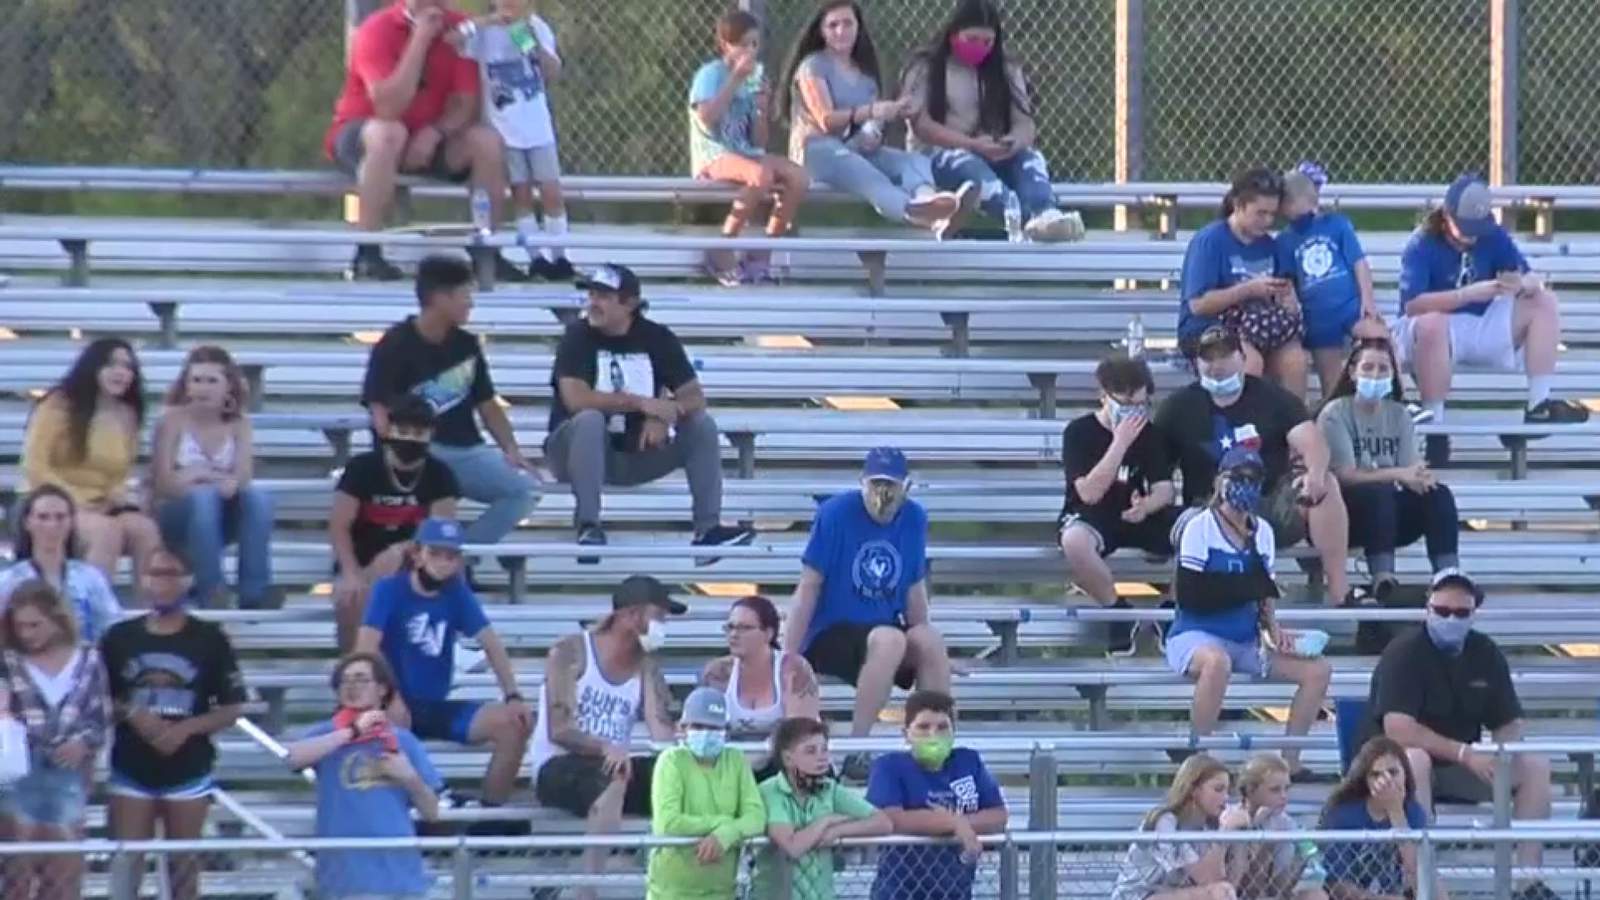 Fans to face new safety measures at high school football games this season